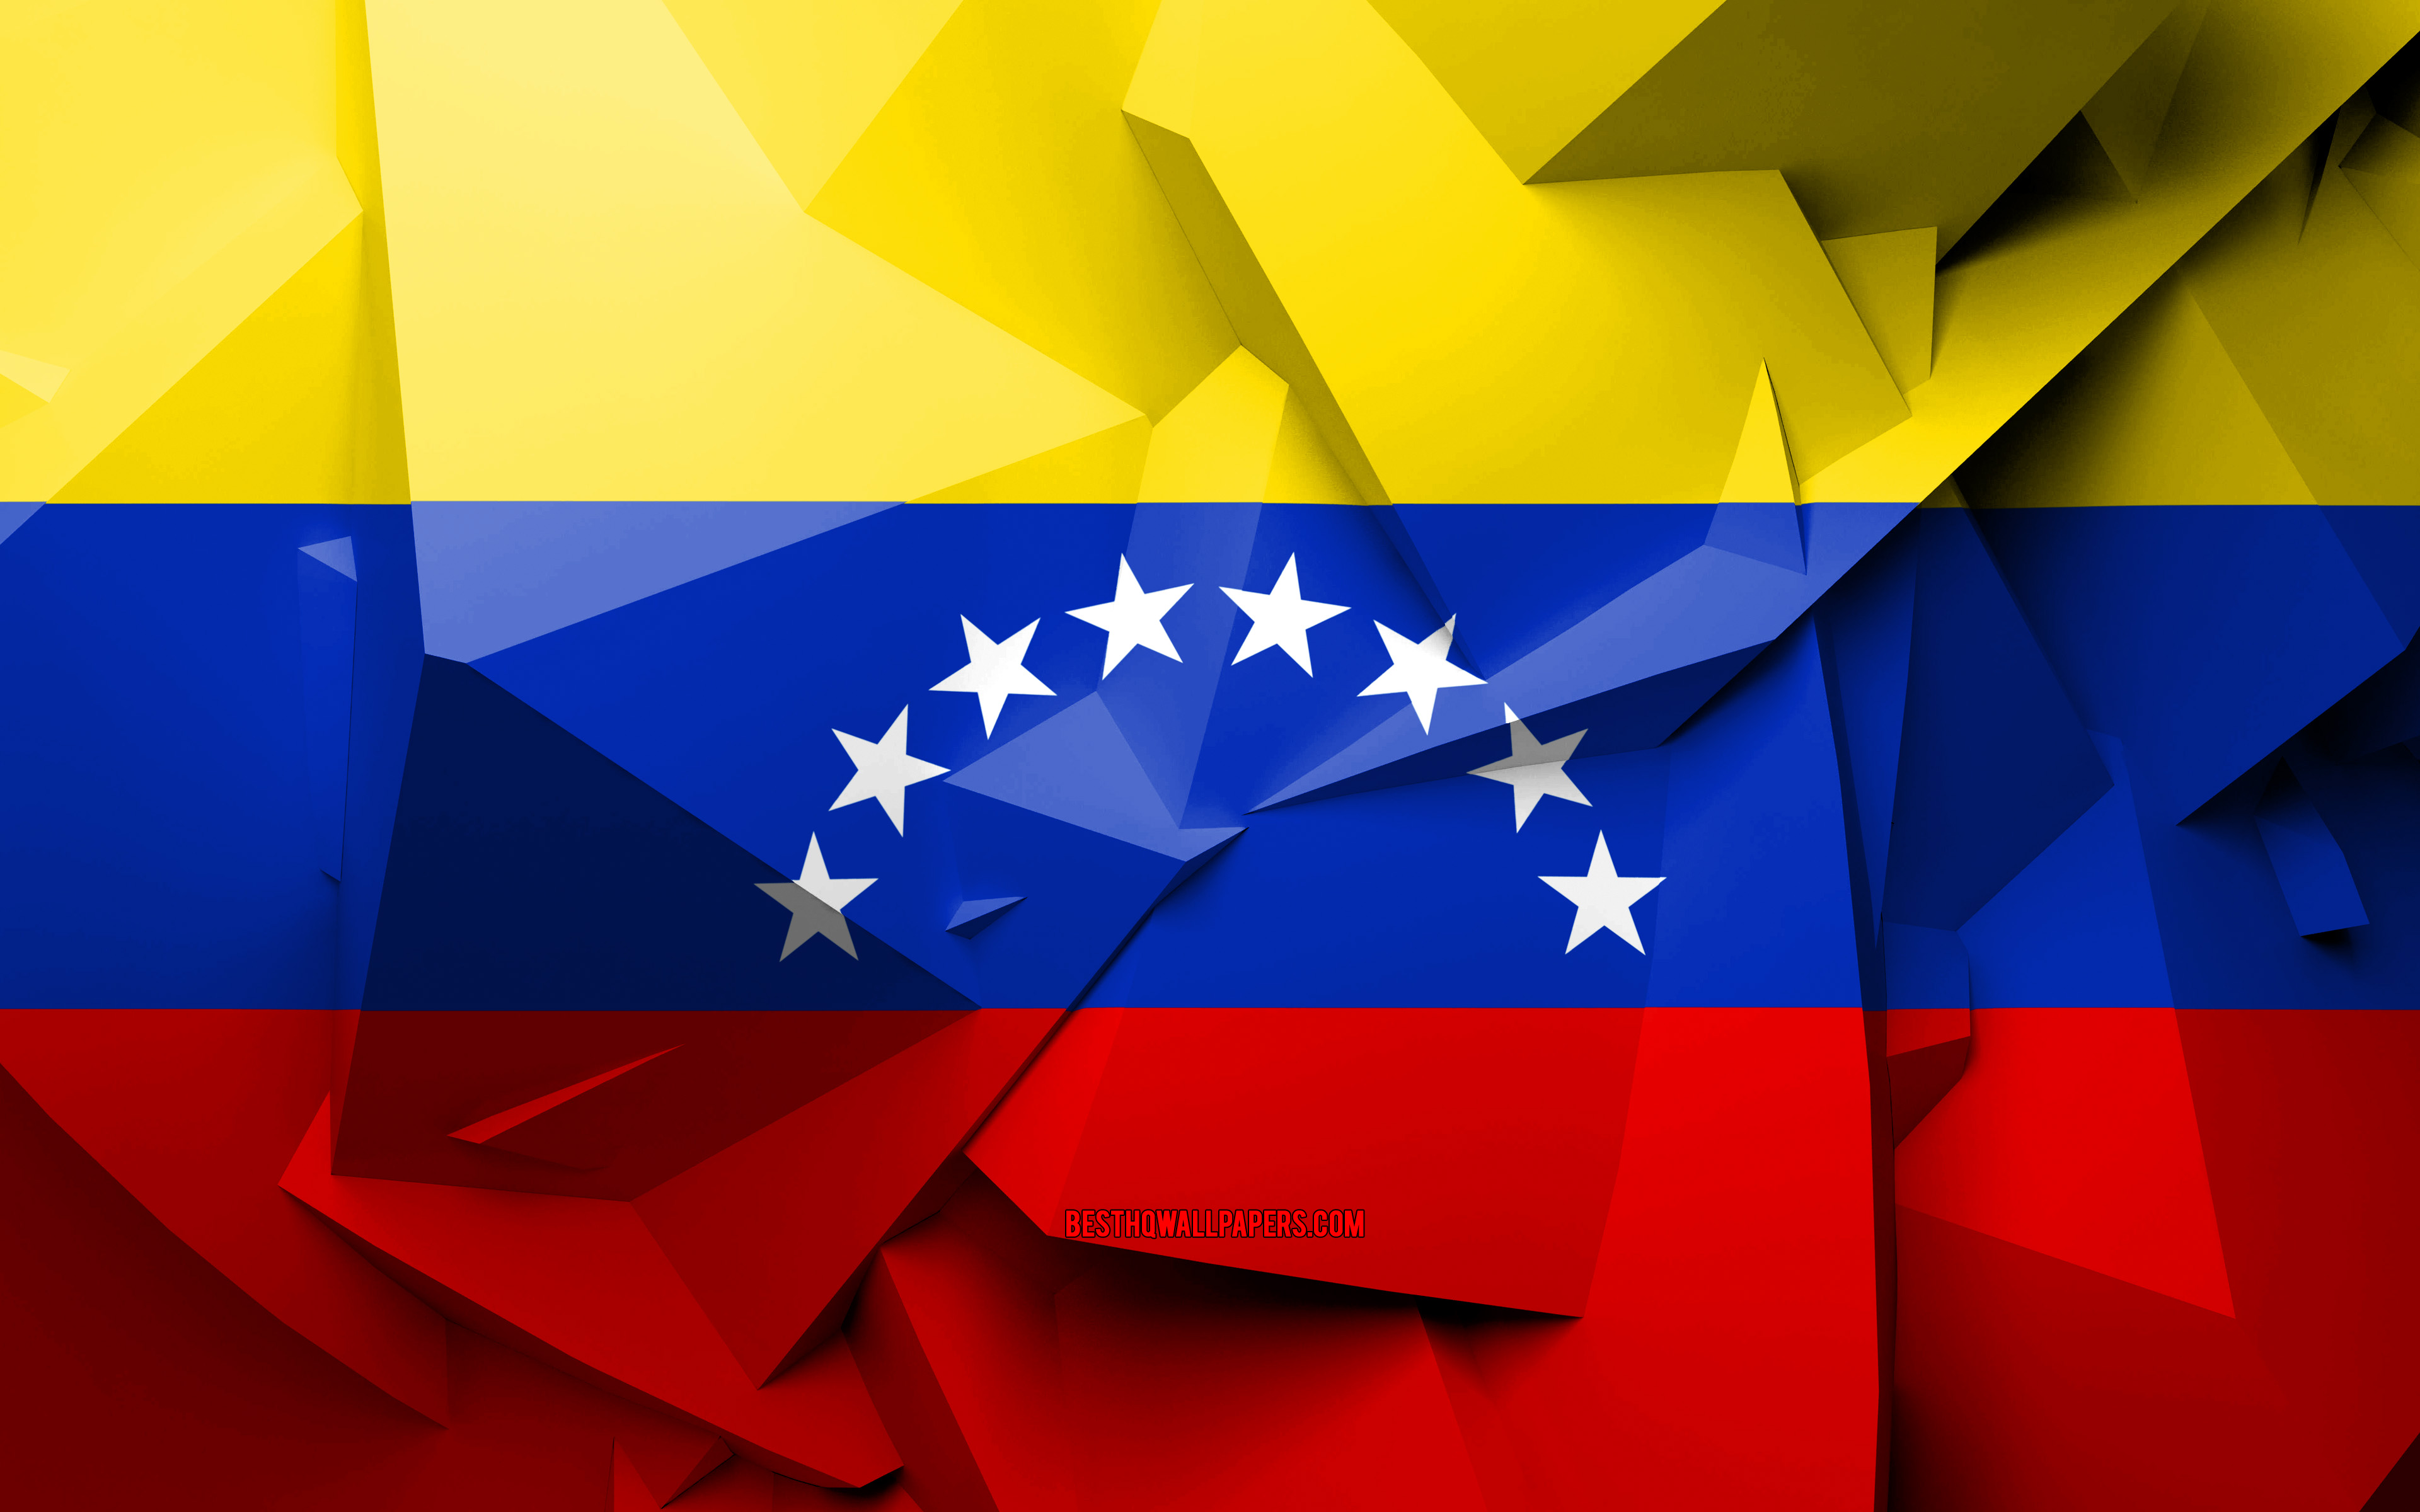 Venezuela Background Images HD Pictures and Wallpaper For Free Download   Pngtree